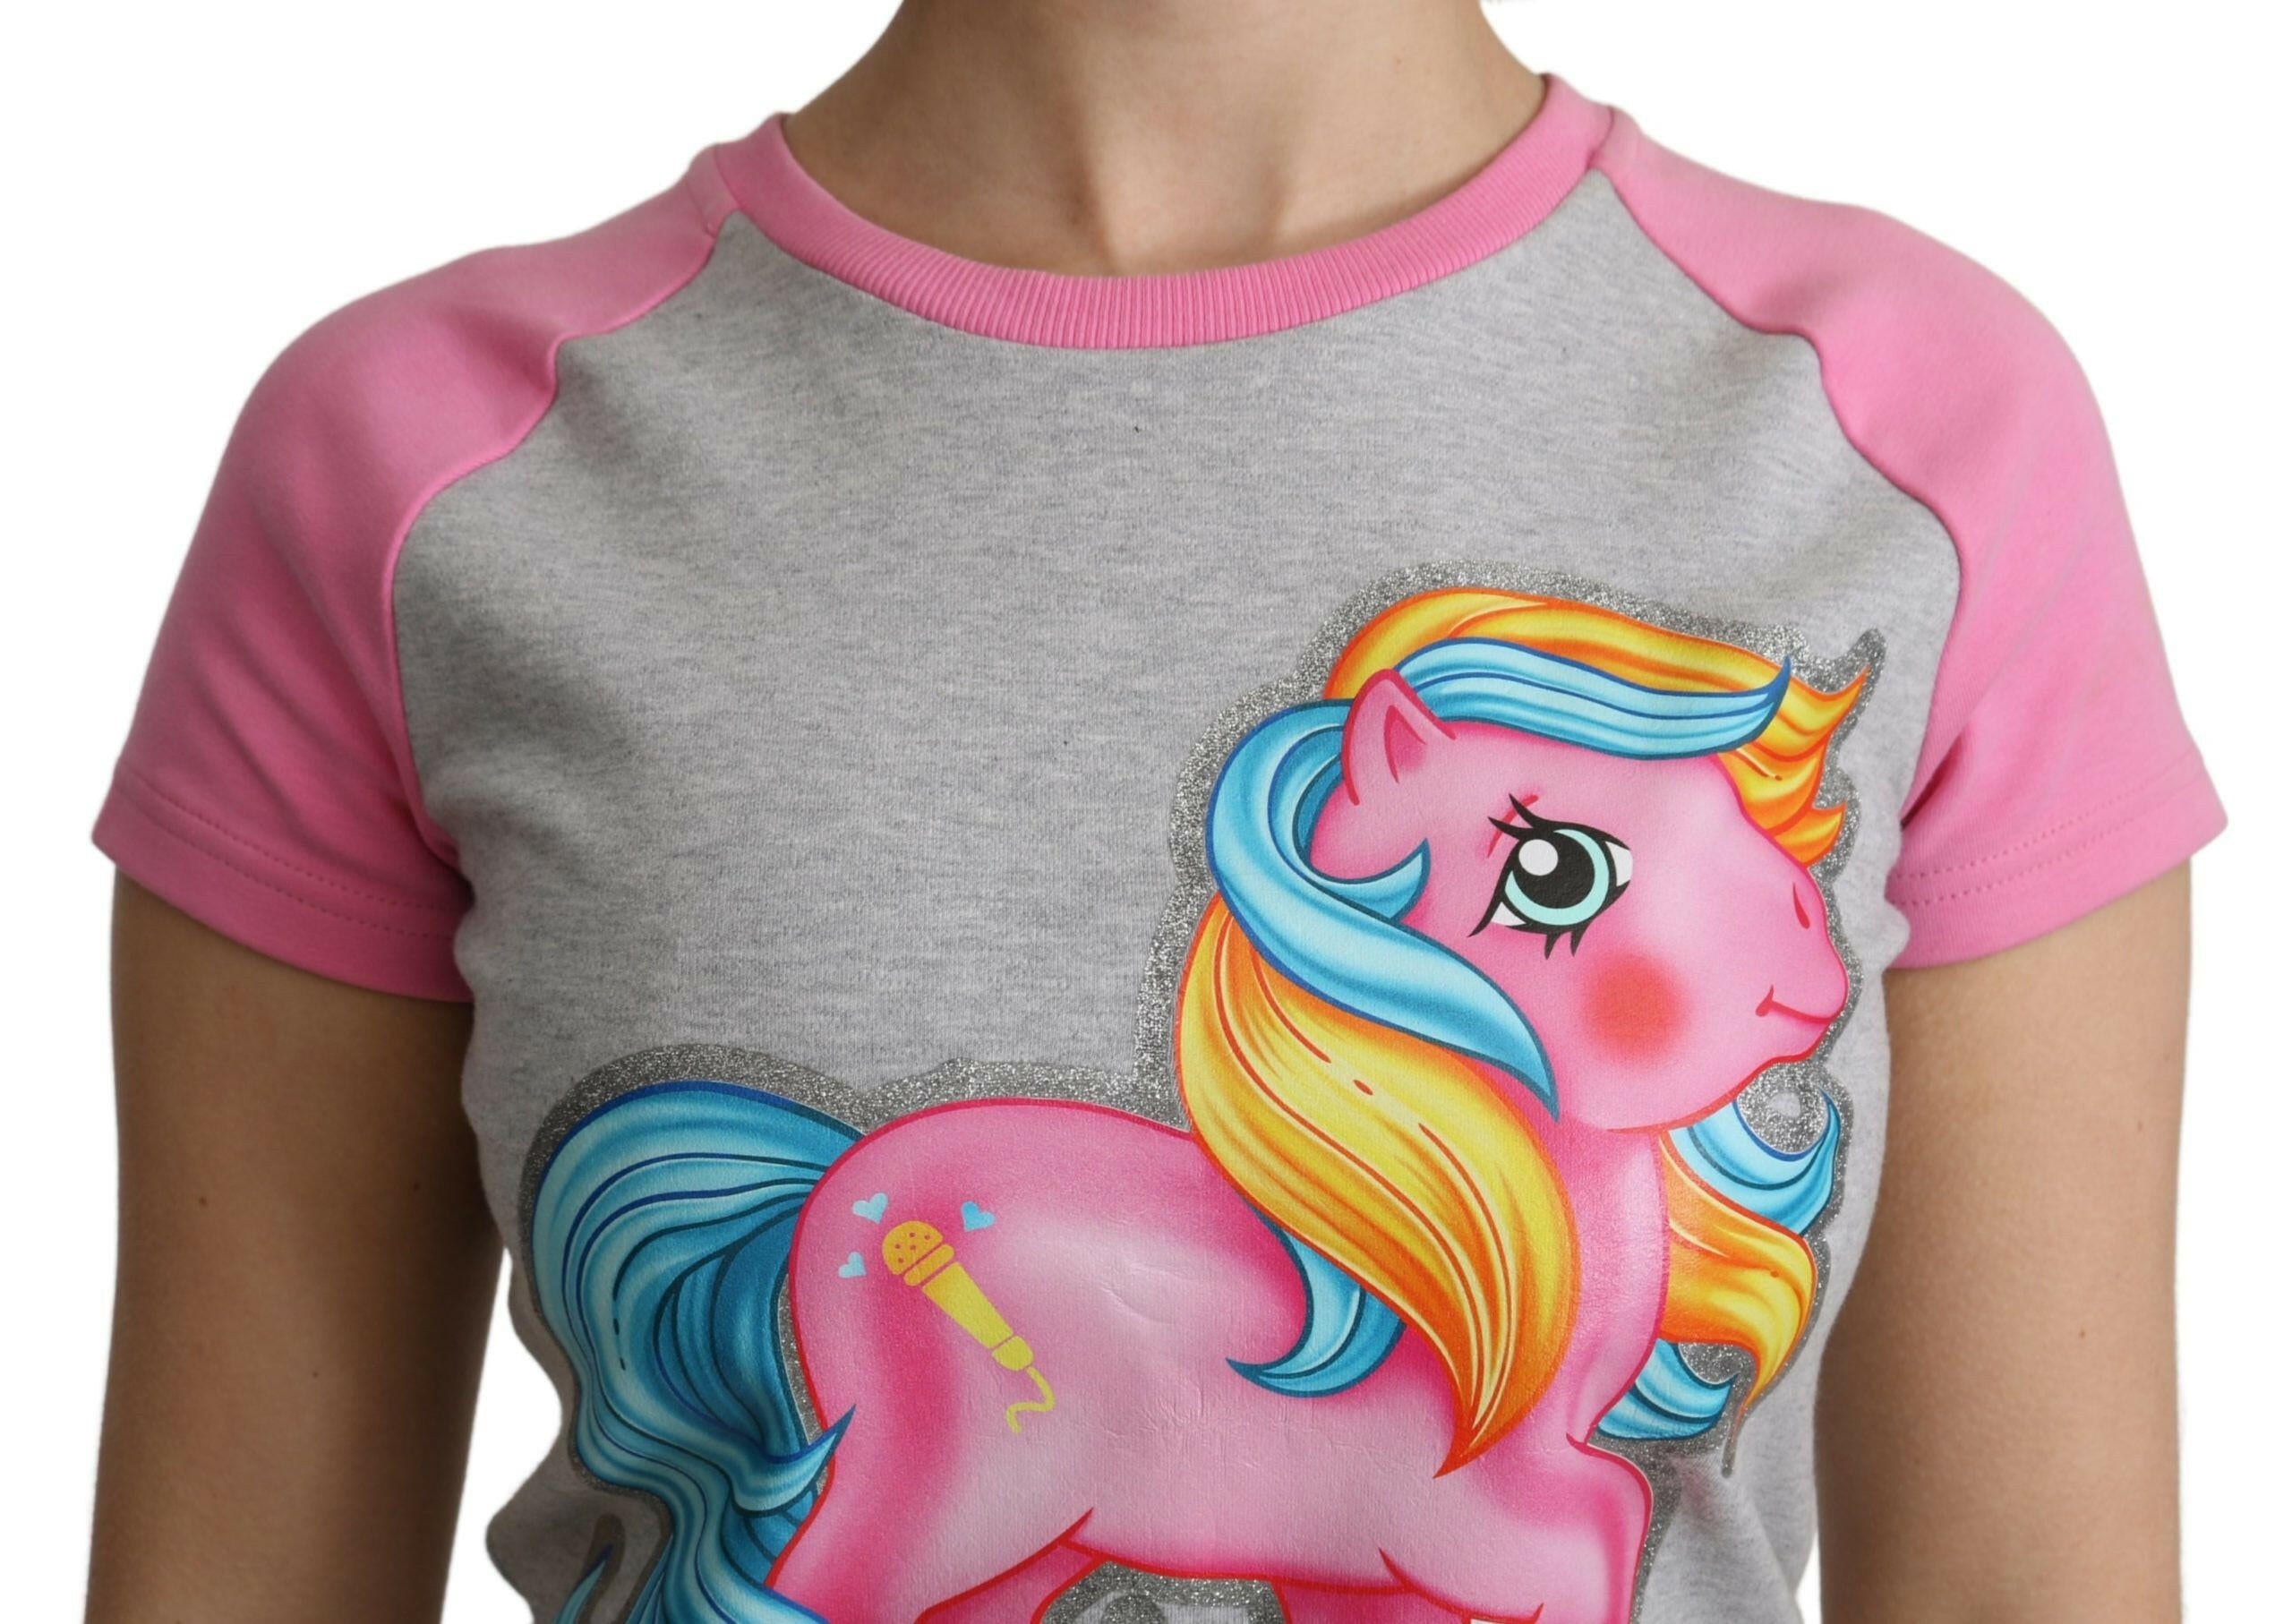 Moschino Gray and pink Cotton T-shirt My Little Pony Top - GENUINE AUTHENTIC BRAND LLC  